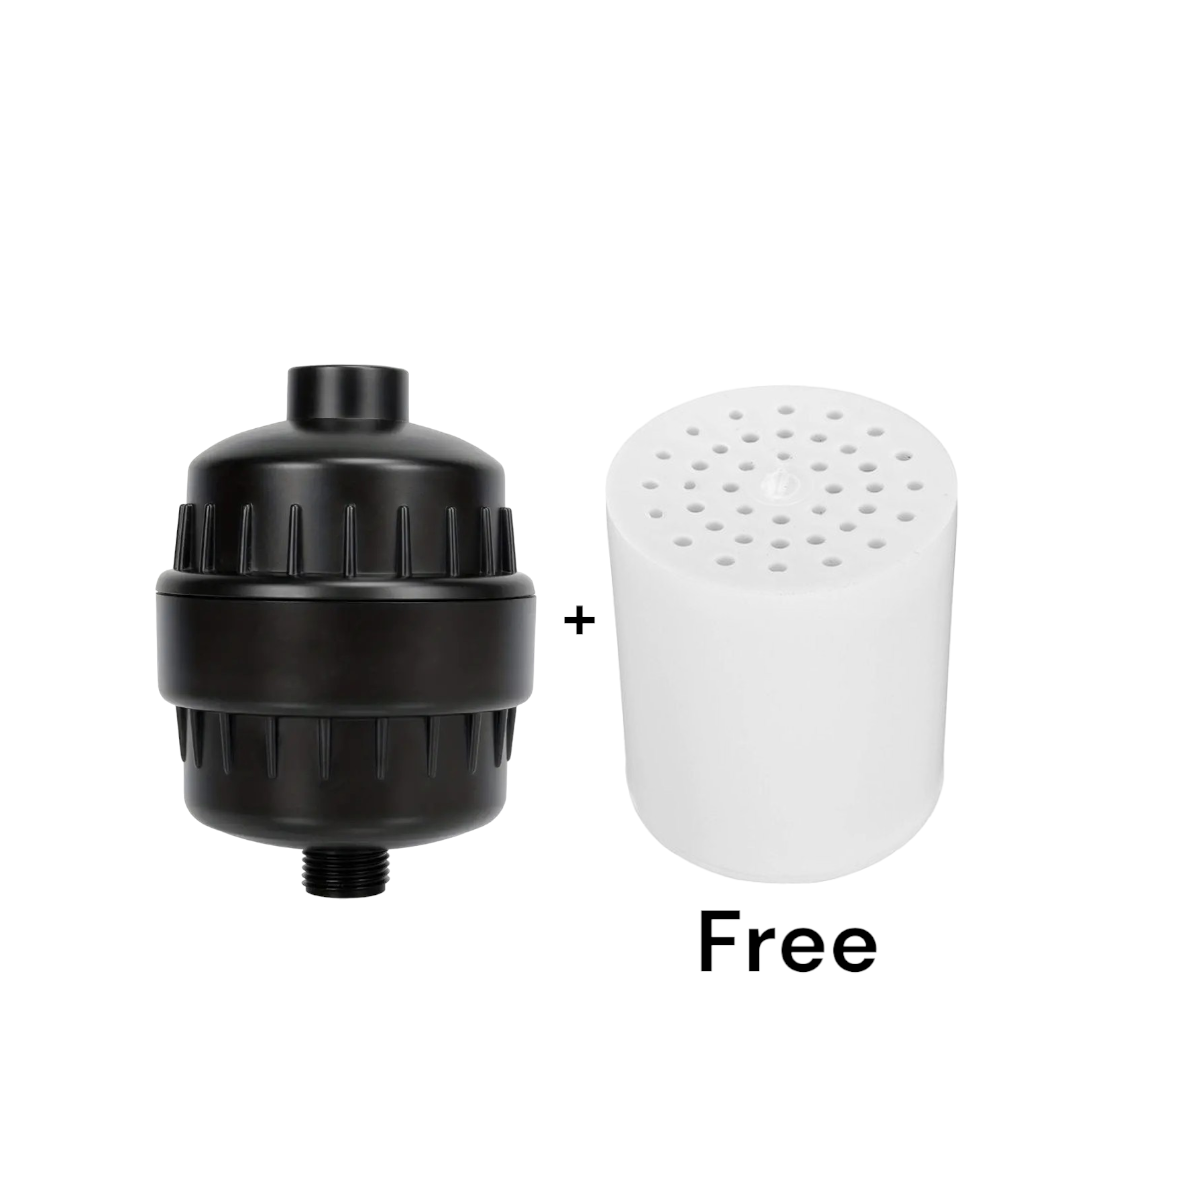 Shower Filter for Hard Water with 1 yr Supply of Replacement Filters: Limited Time Offer